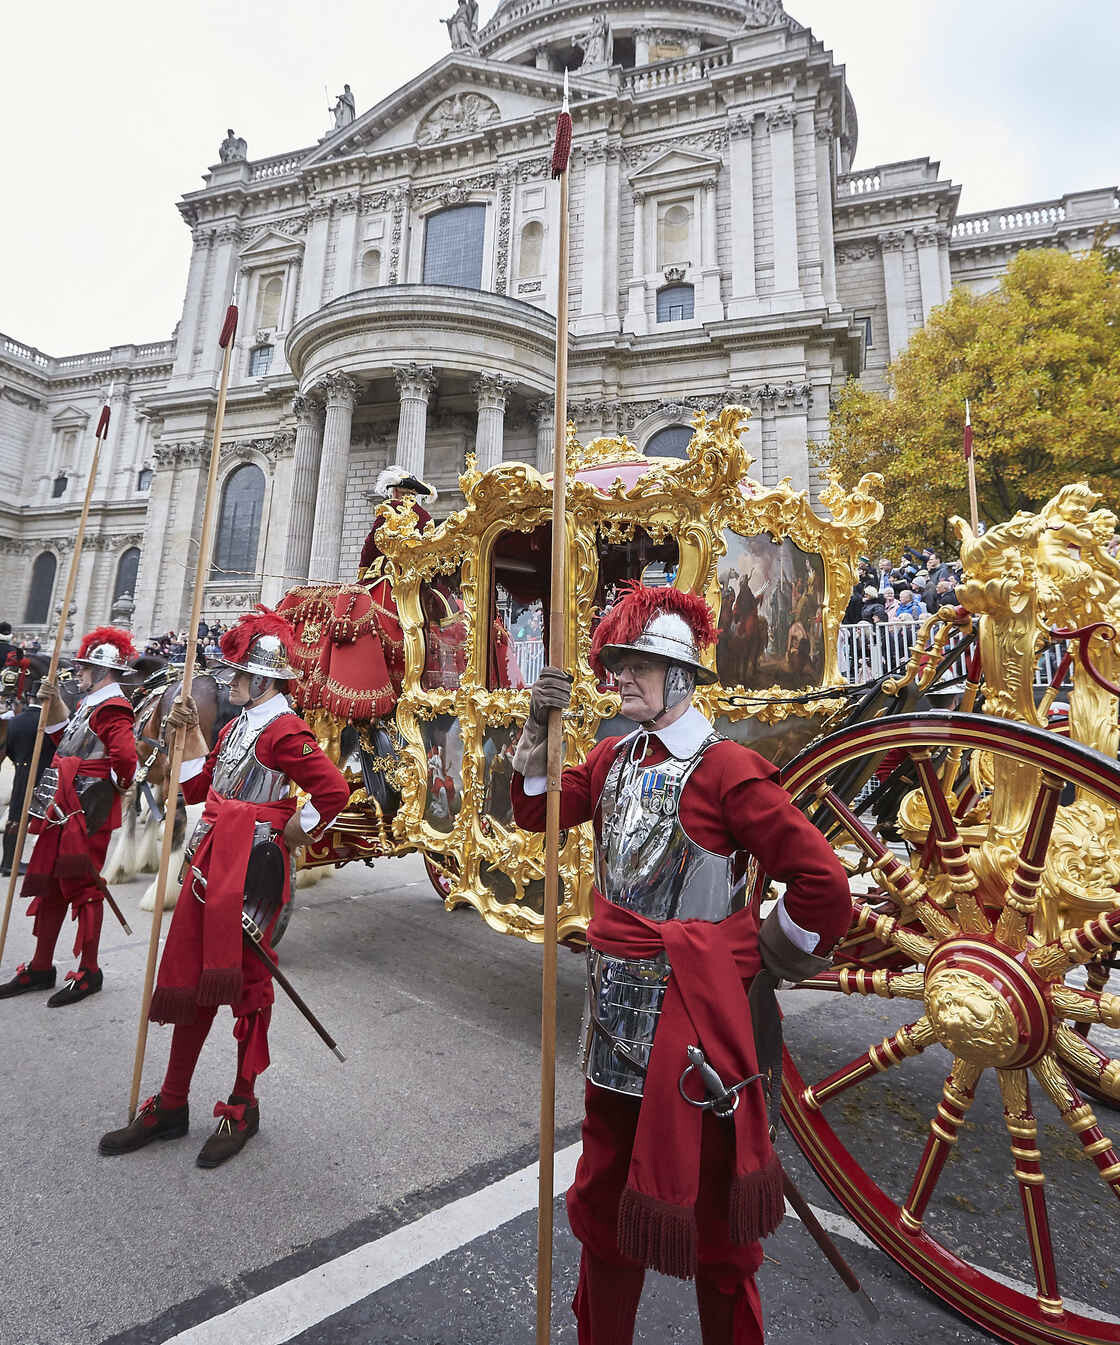 The Lord Mayor's Show